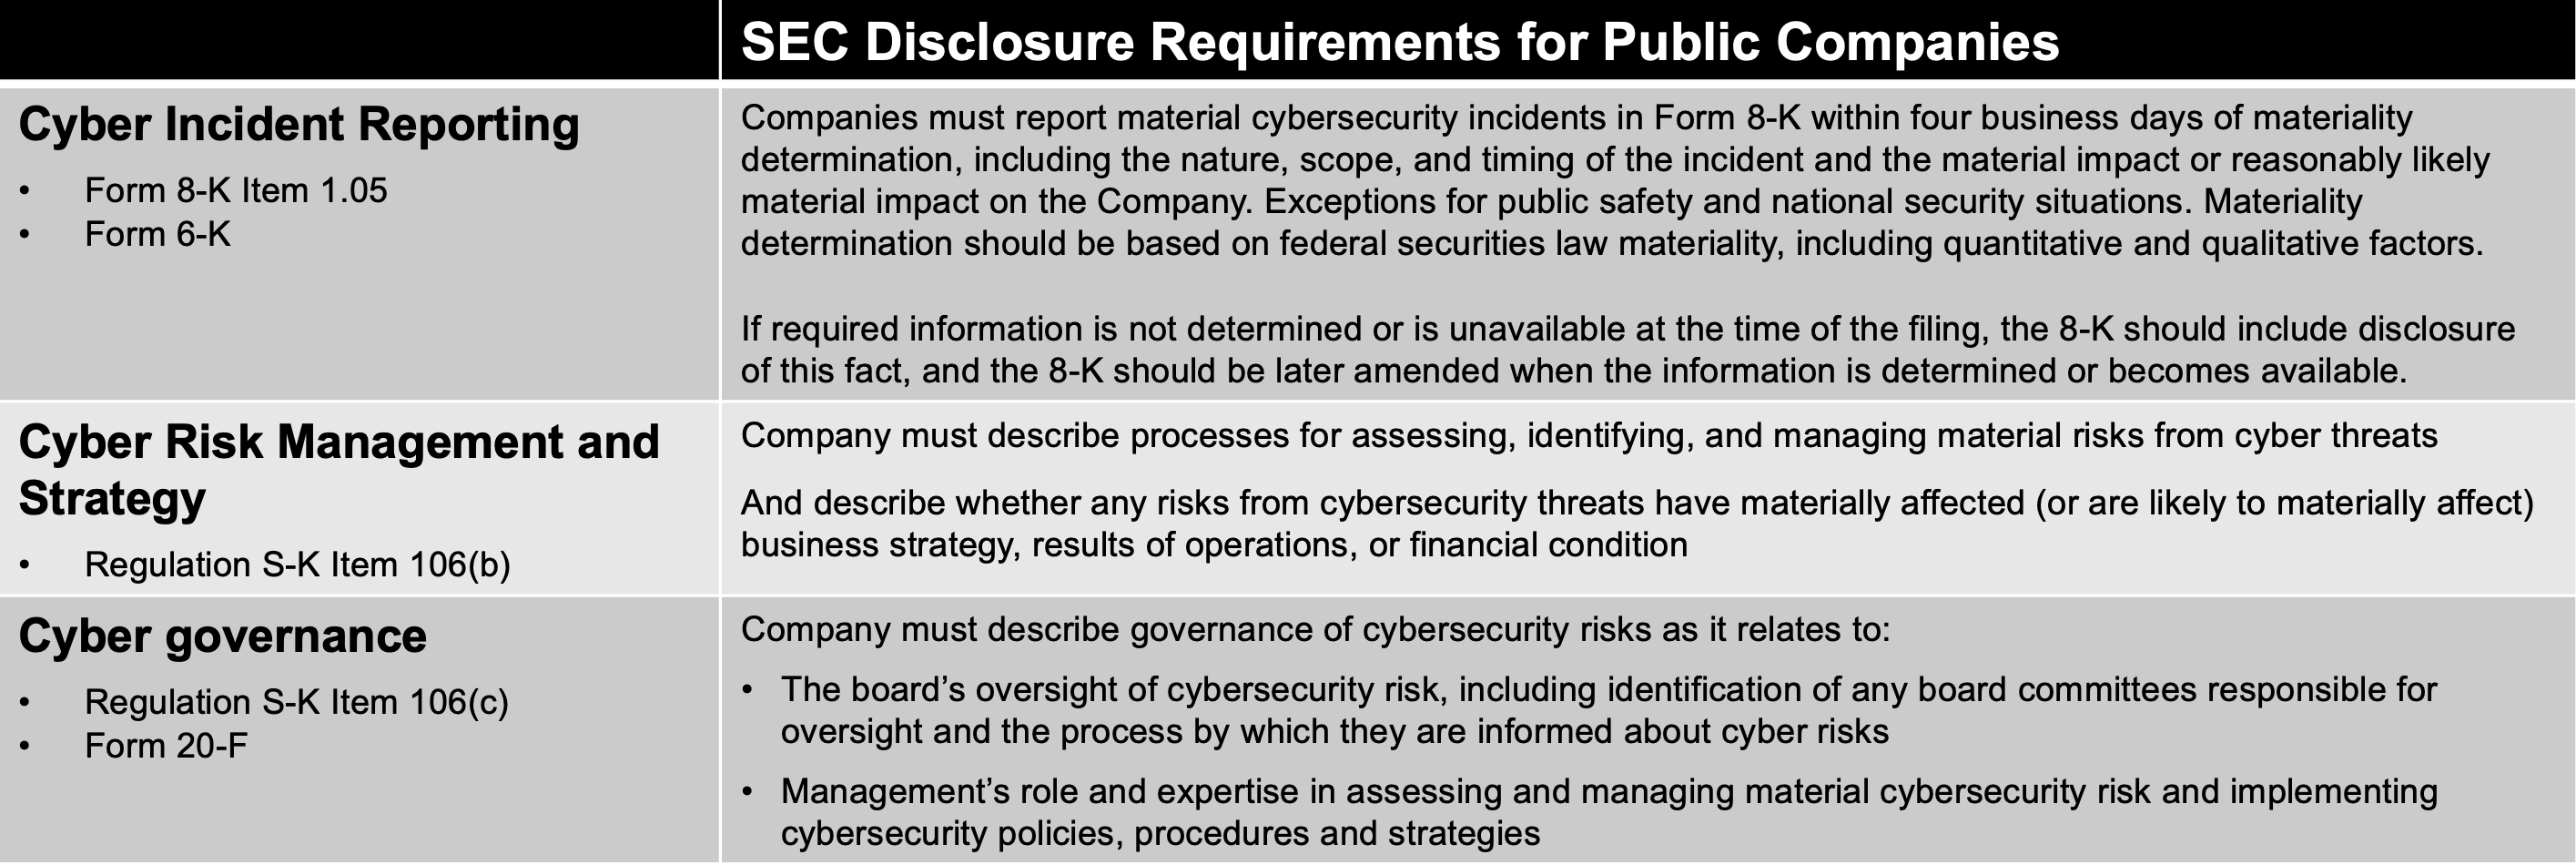 Table of SEC cybersecurity disclosure requirements